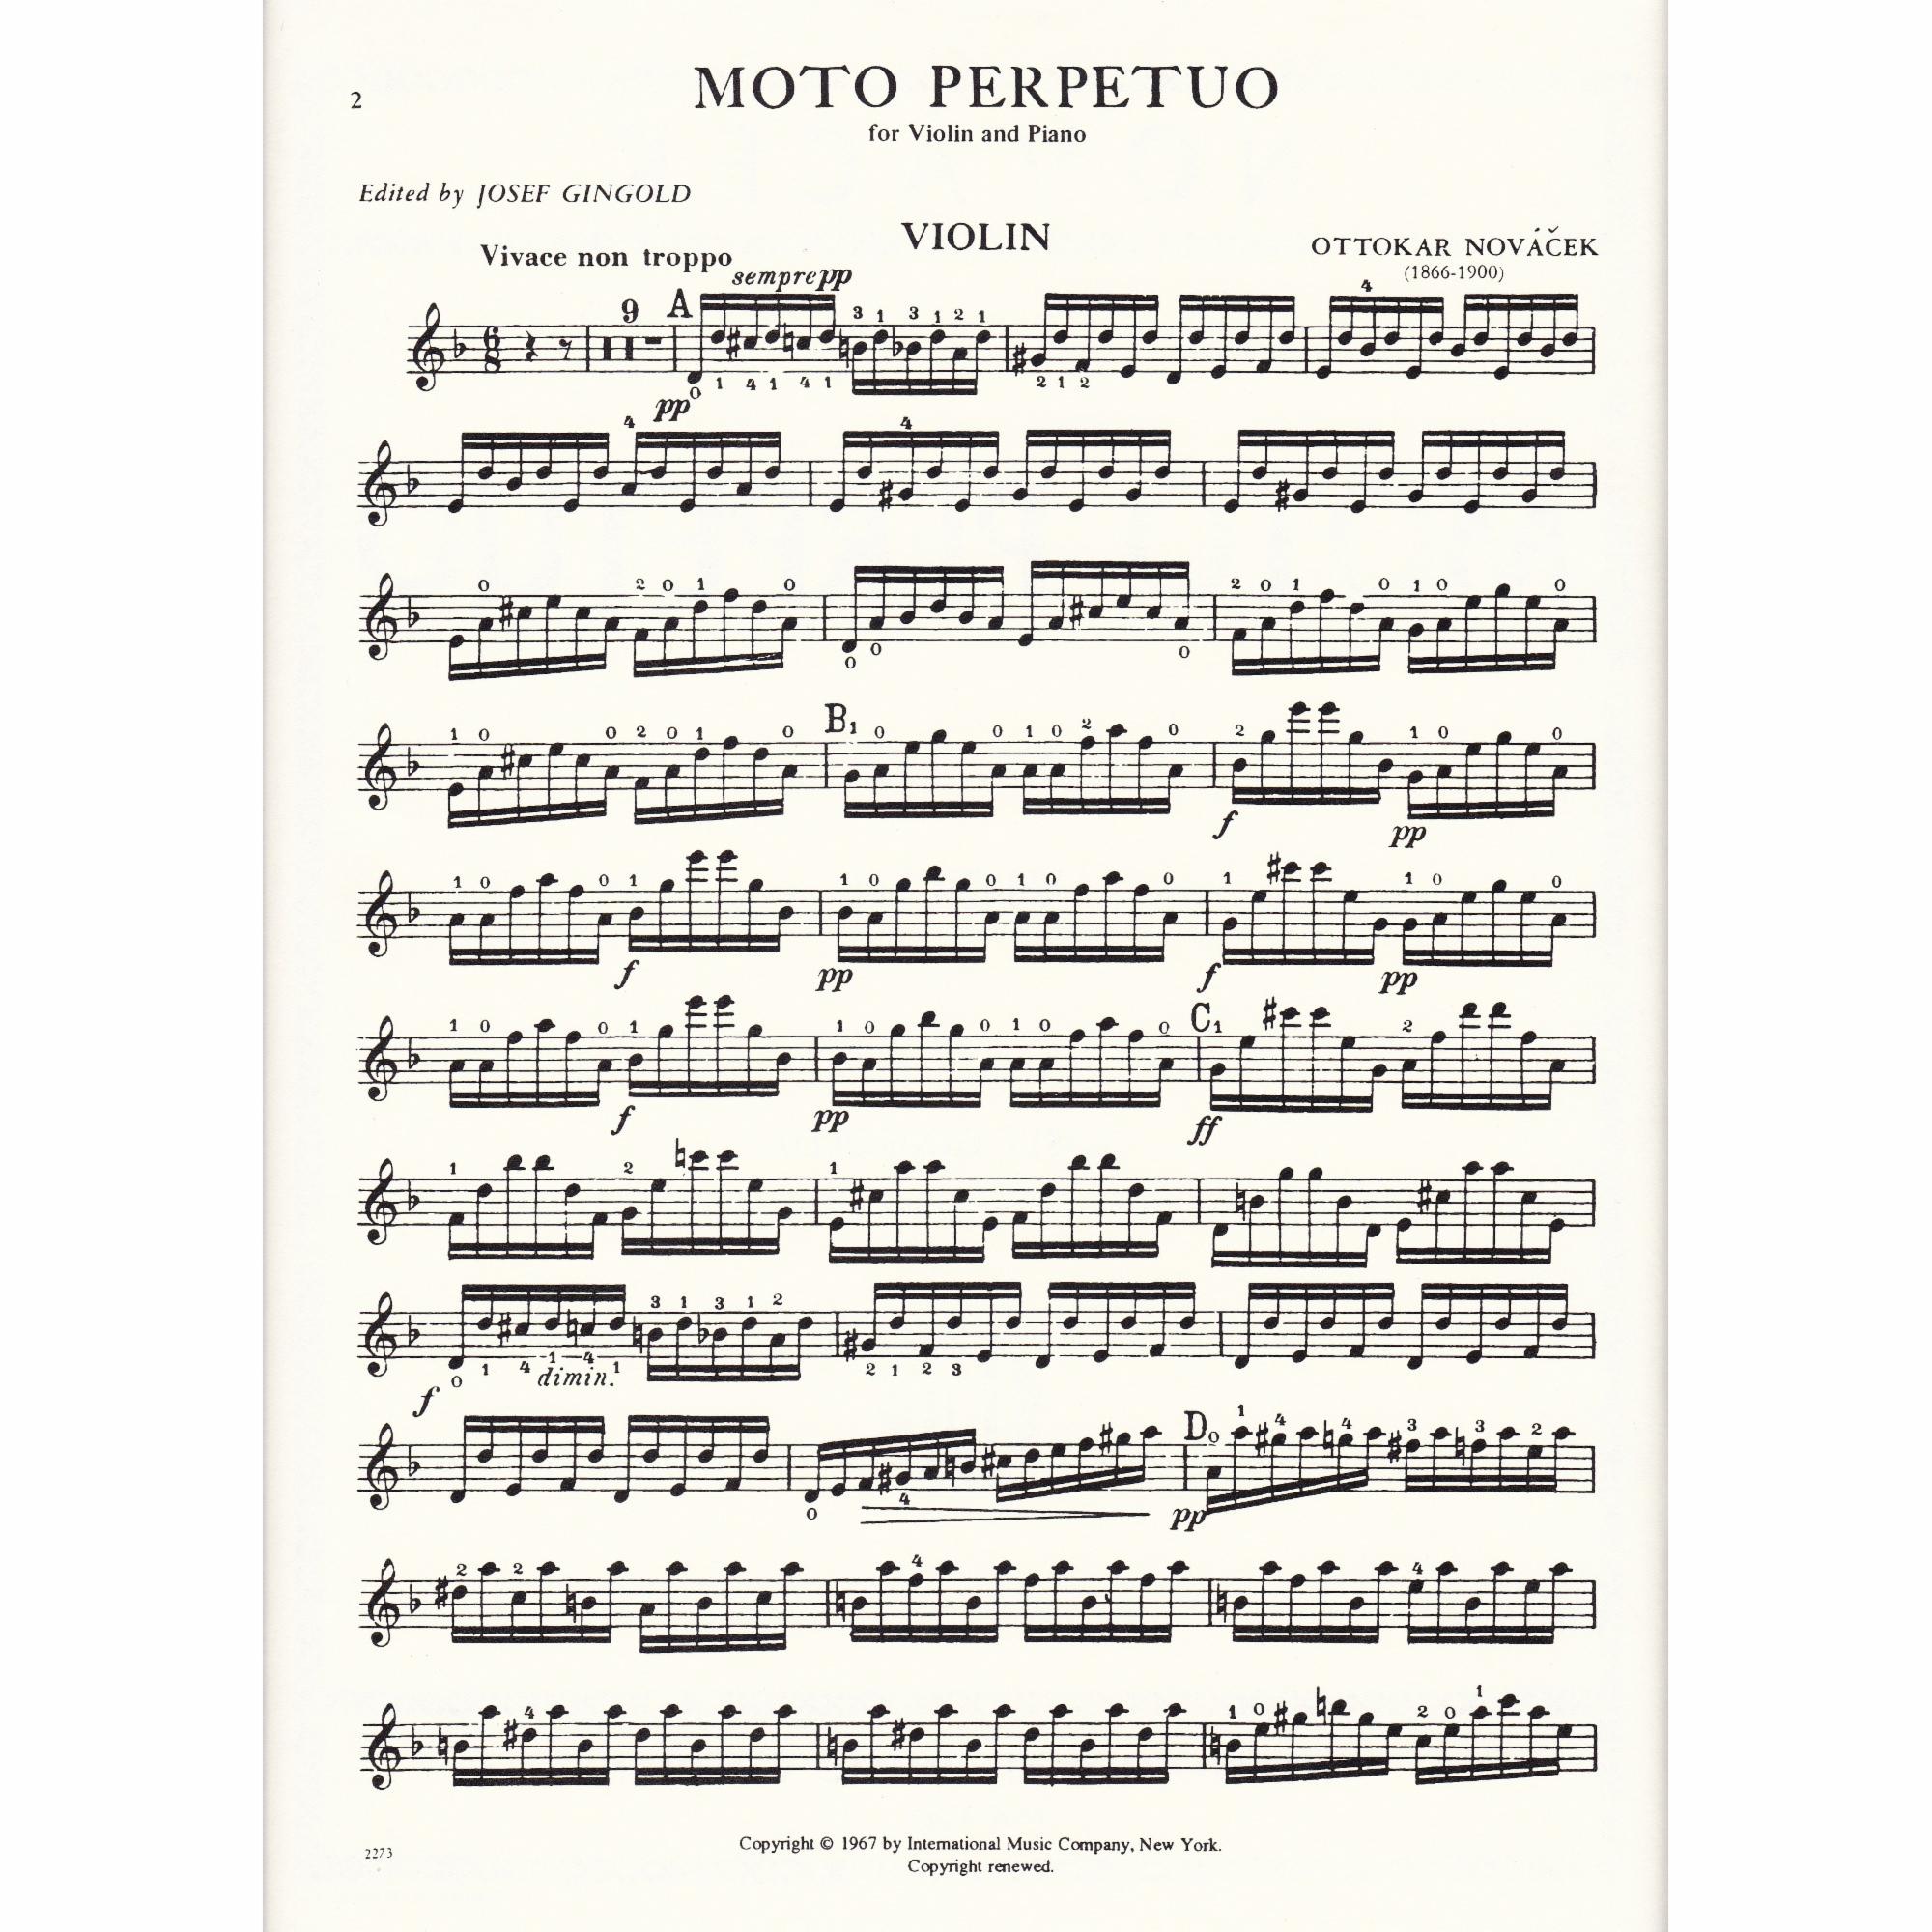 Moto Perpetuo for violin and piano